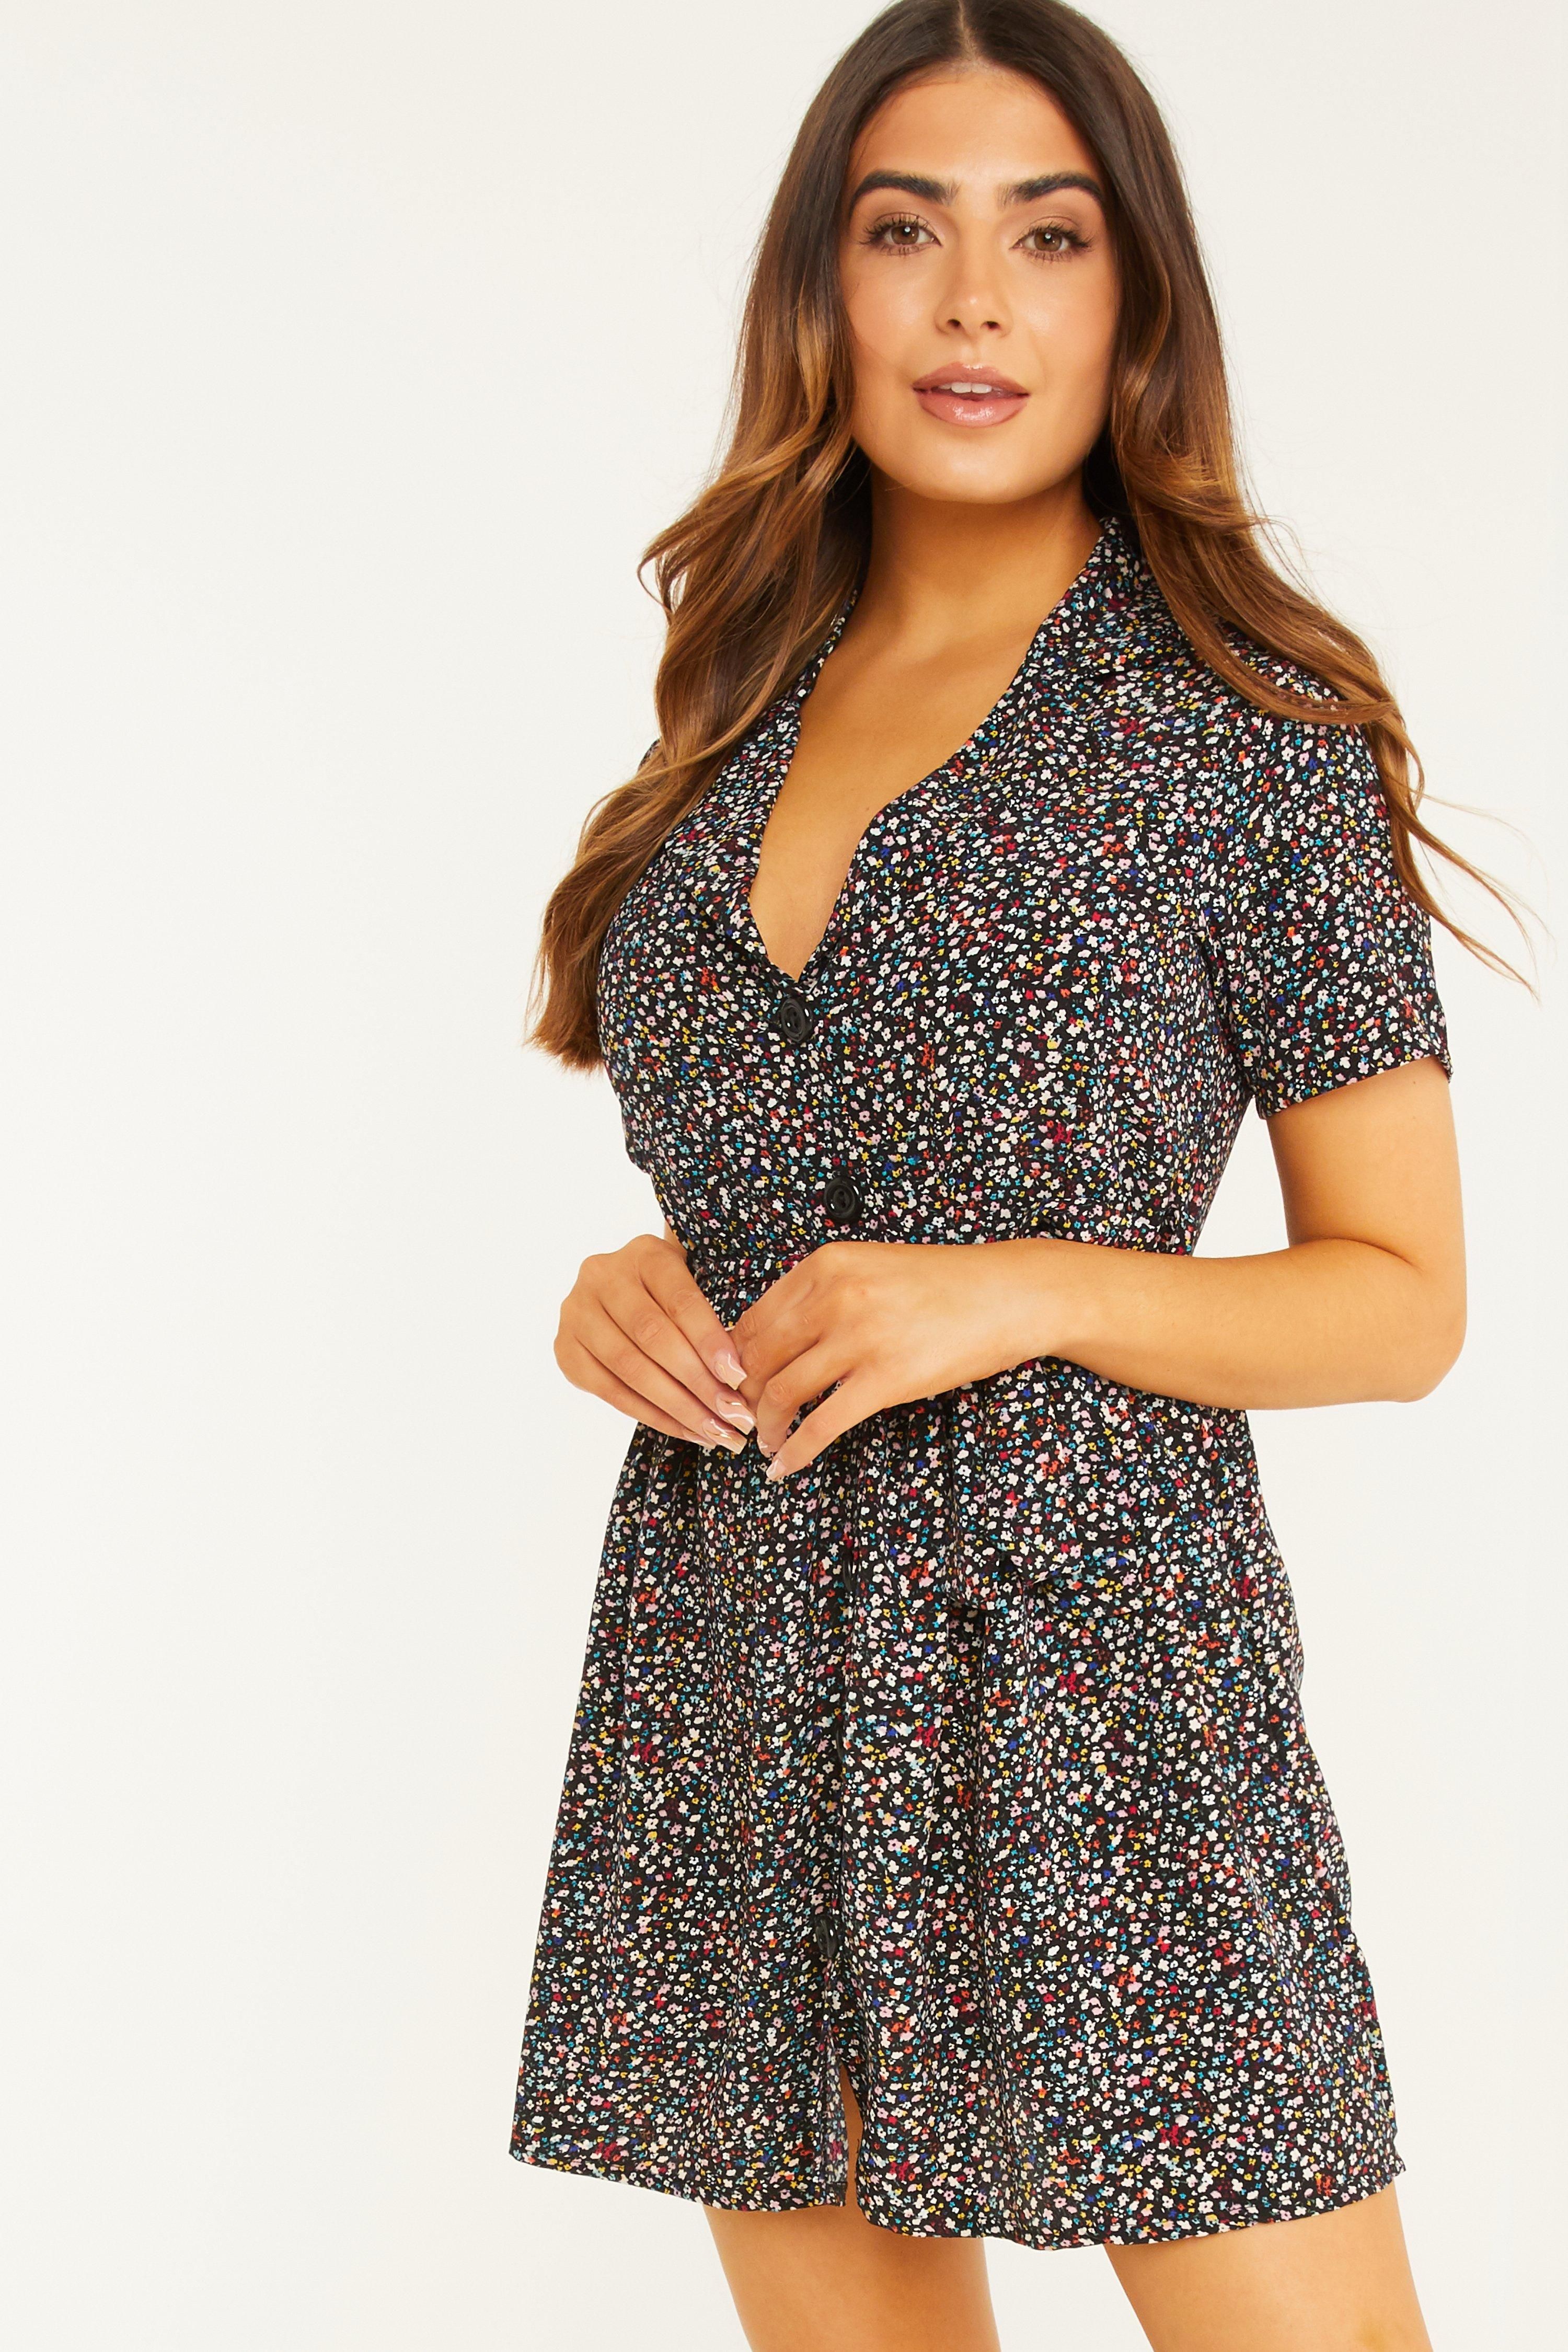 - Petite collection  - Floral print   - Skater dress  - Tie waist  - Button front  - Length: 88cm approx  - Model Height: 5' 3